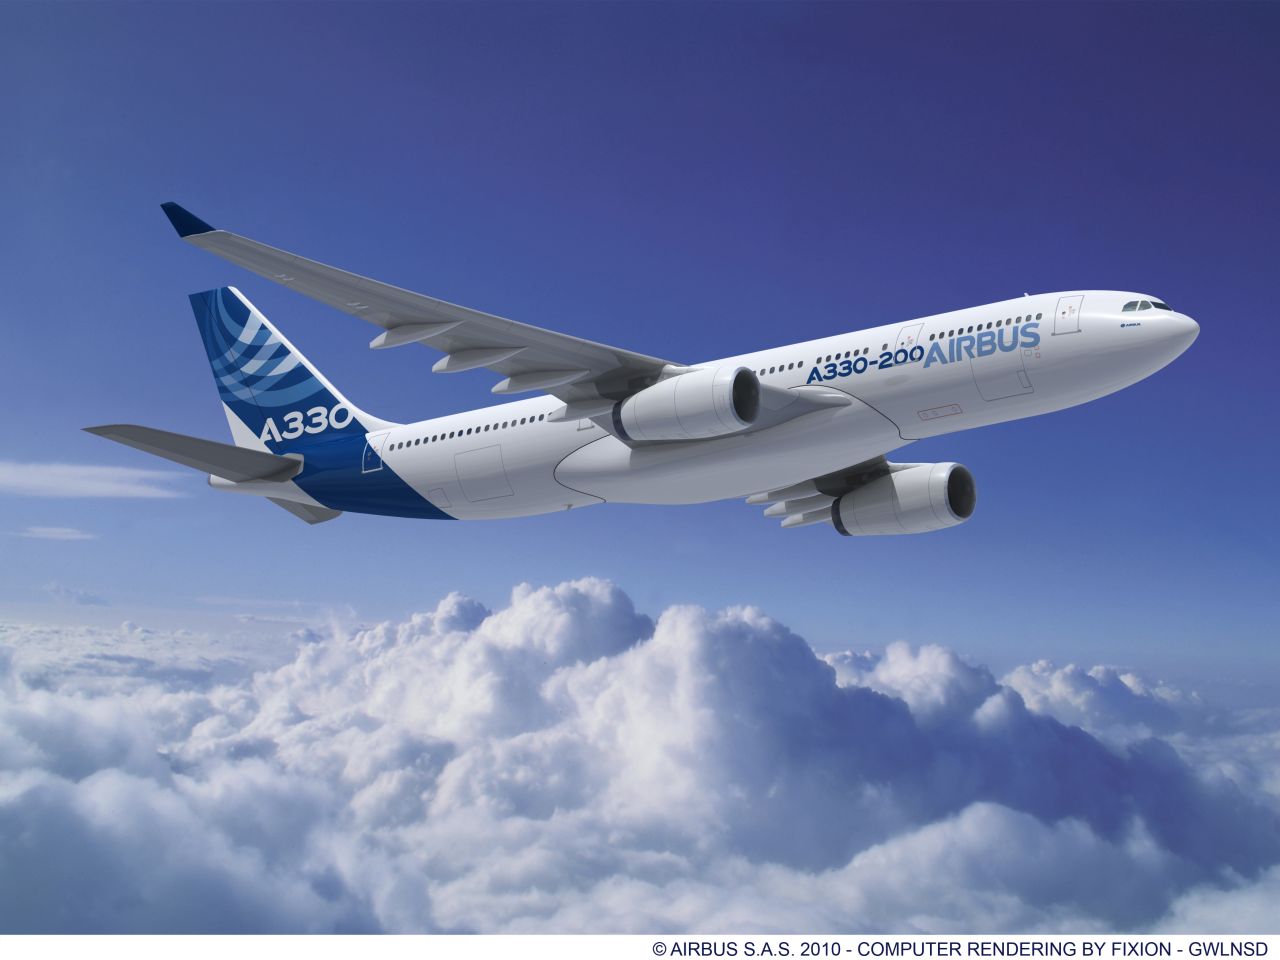 The wide-body twin-engine Airbus A330 is primarily used on medium to long-range flights. It has a large wing tip and a pointed nose. It comes in two sizes -- the A330-200 and the longer A330-300 -- and has been in service since 1994. 